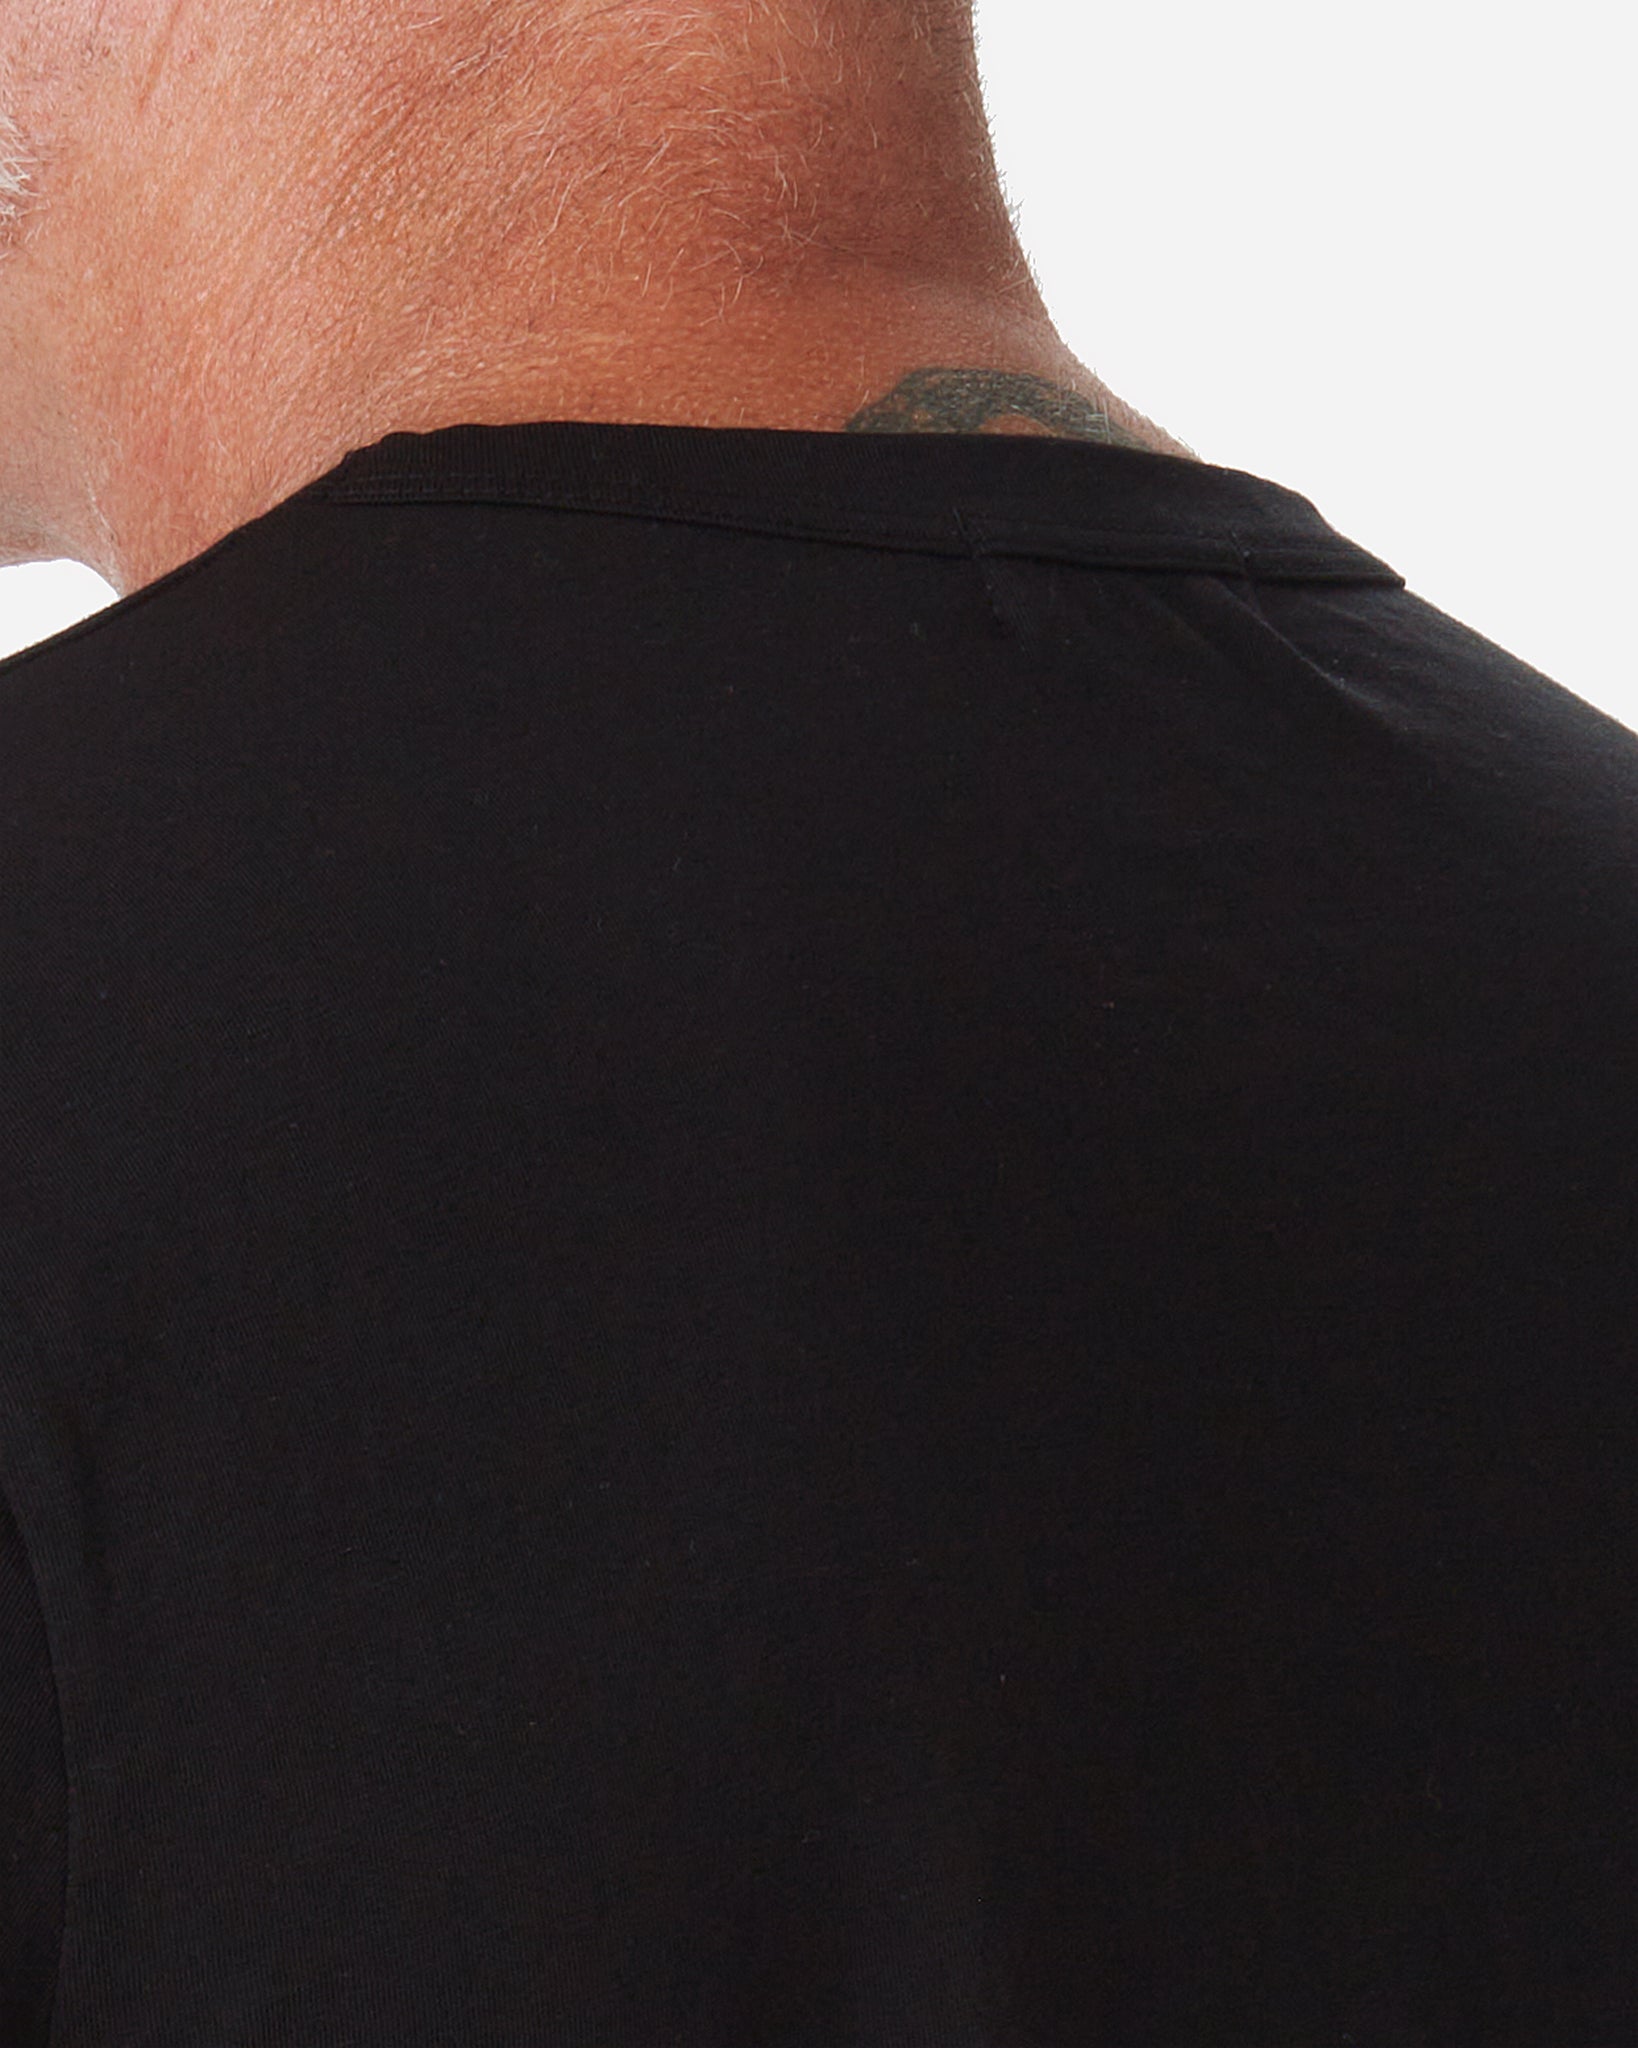 back of neck of model wearing Ace Rivington men's black t shirt made with super soft supima cotton 